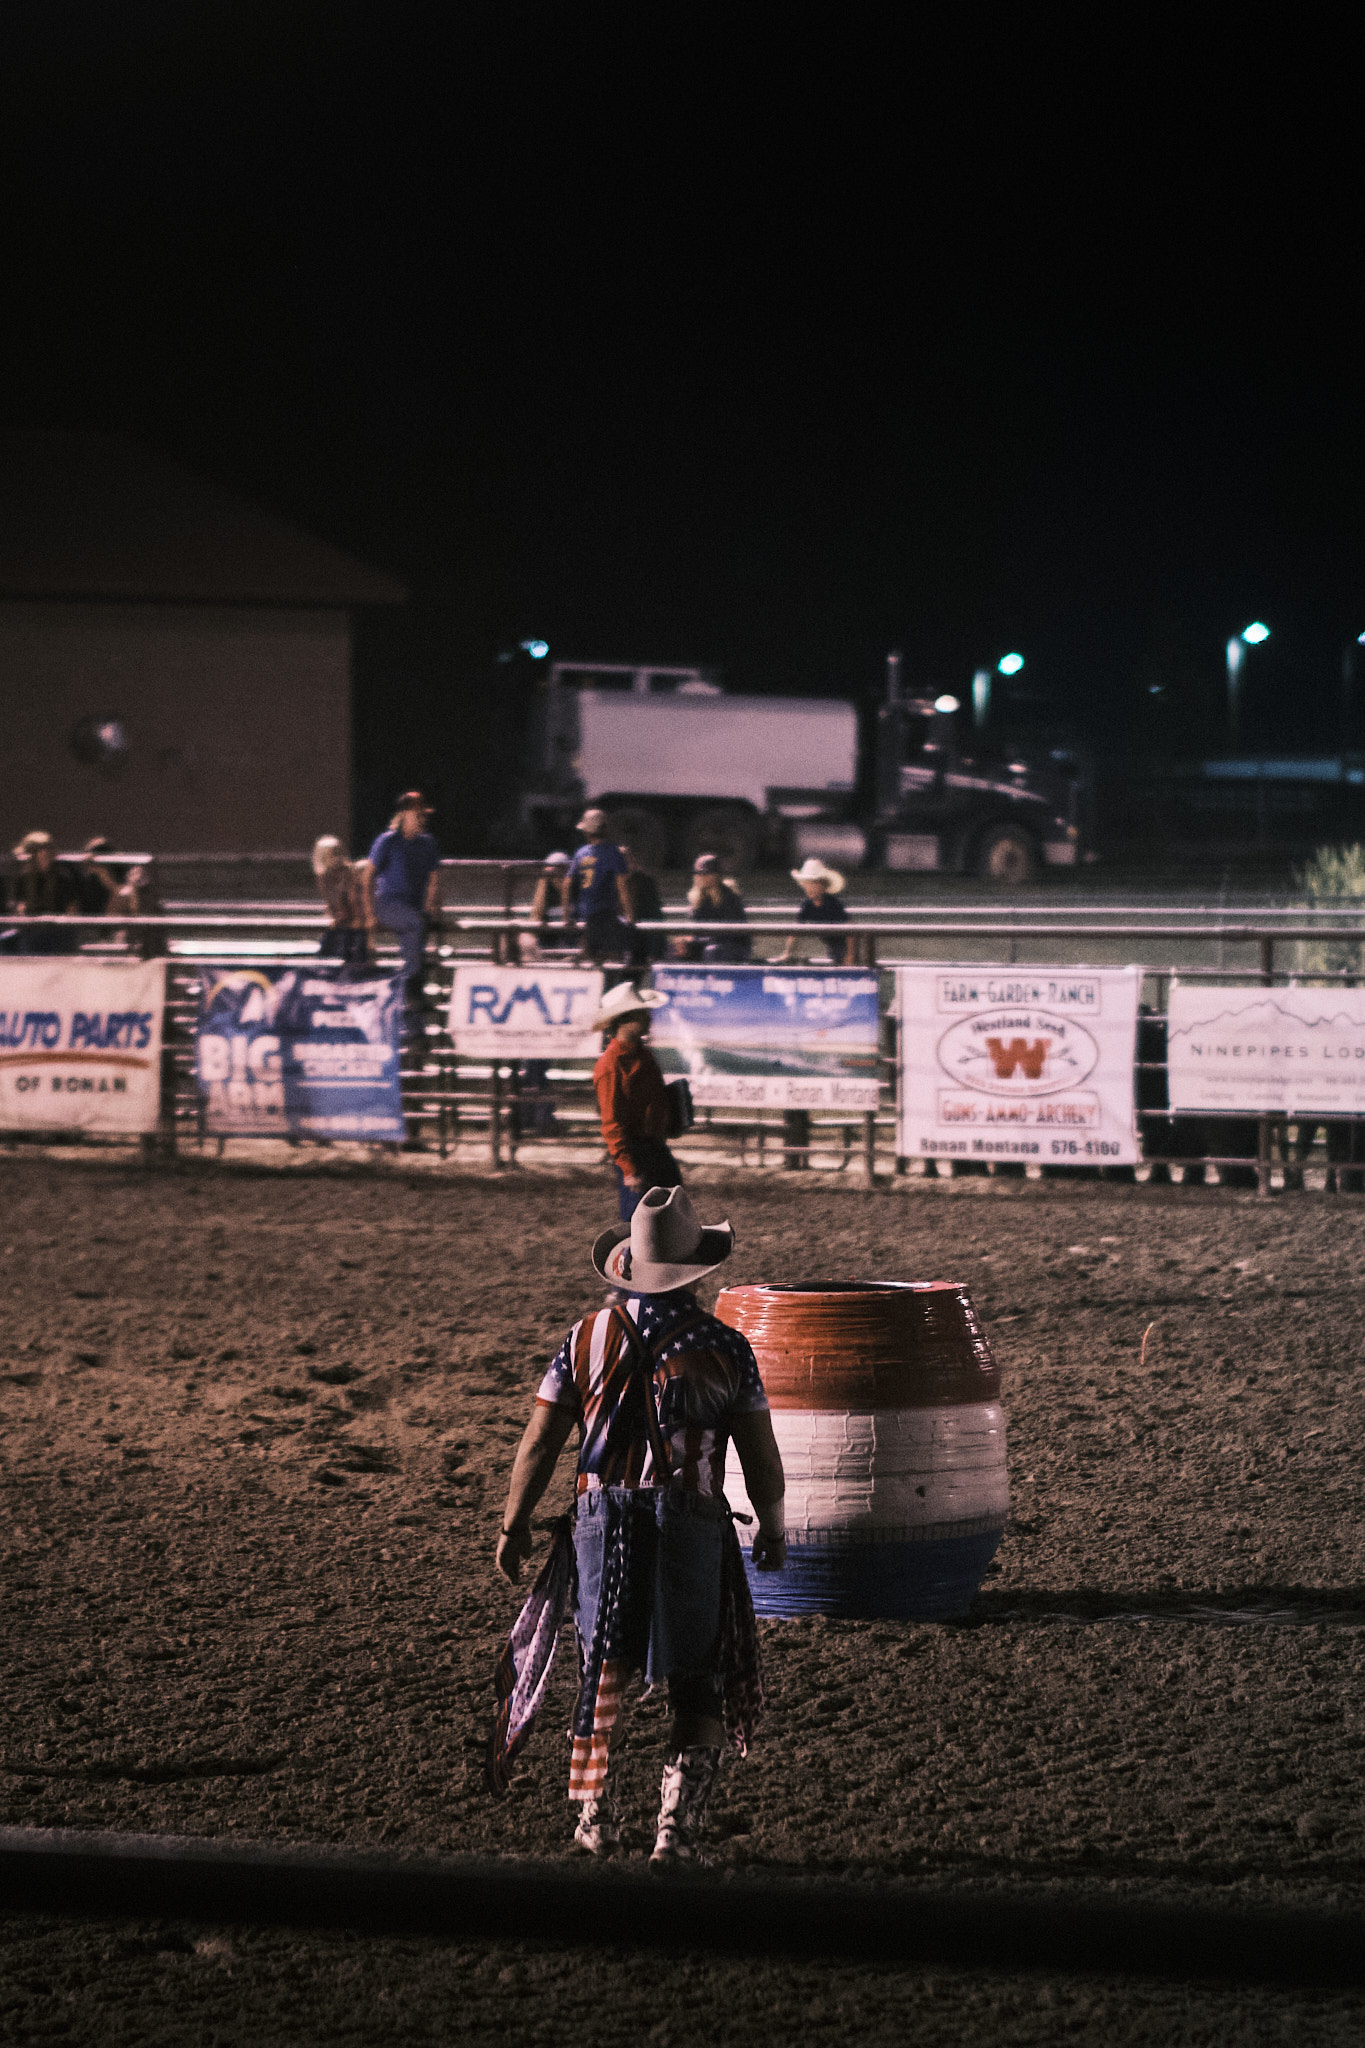 A cowboy in a red, white, and blue outfit standing in the arena by a red, white, and blue barrel